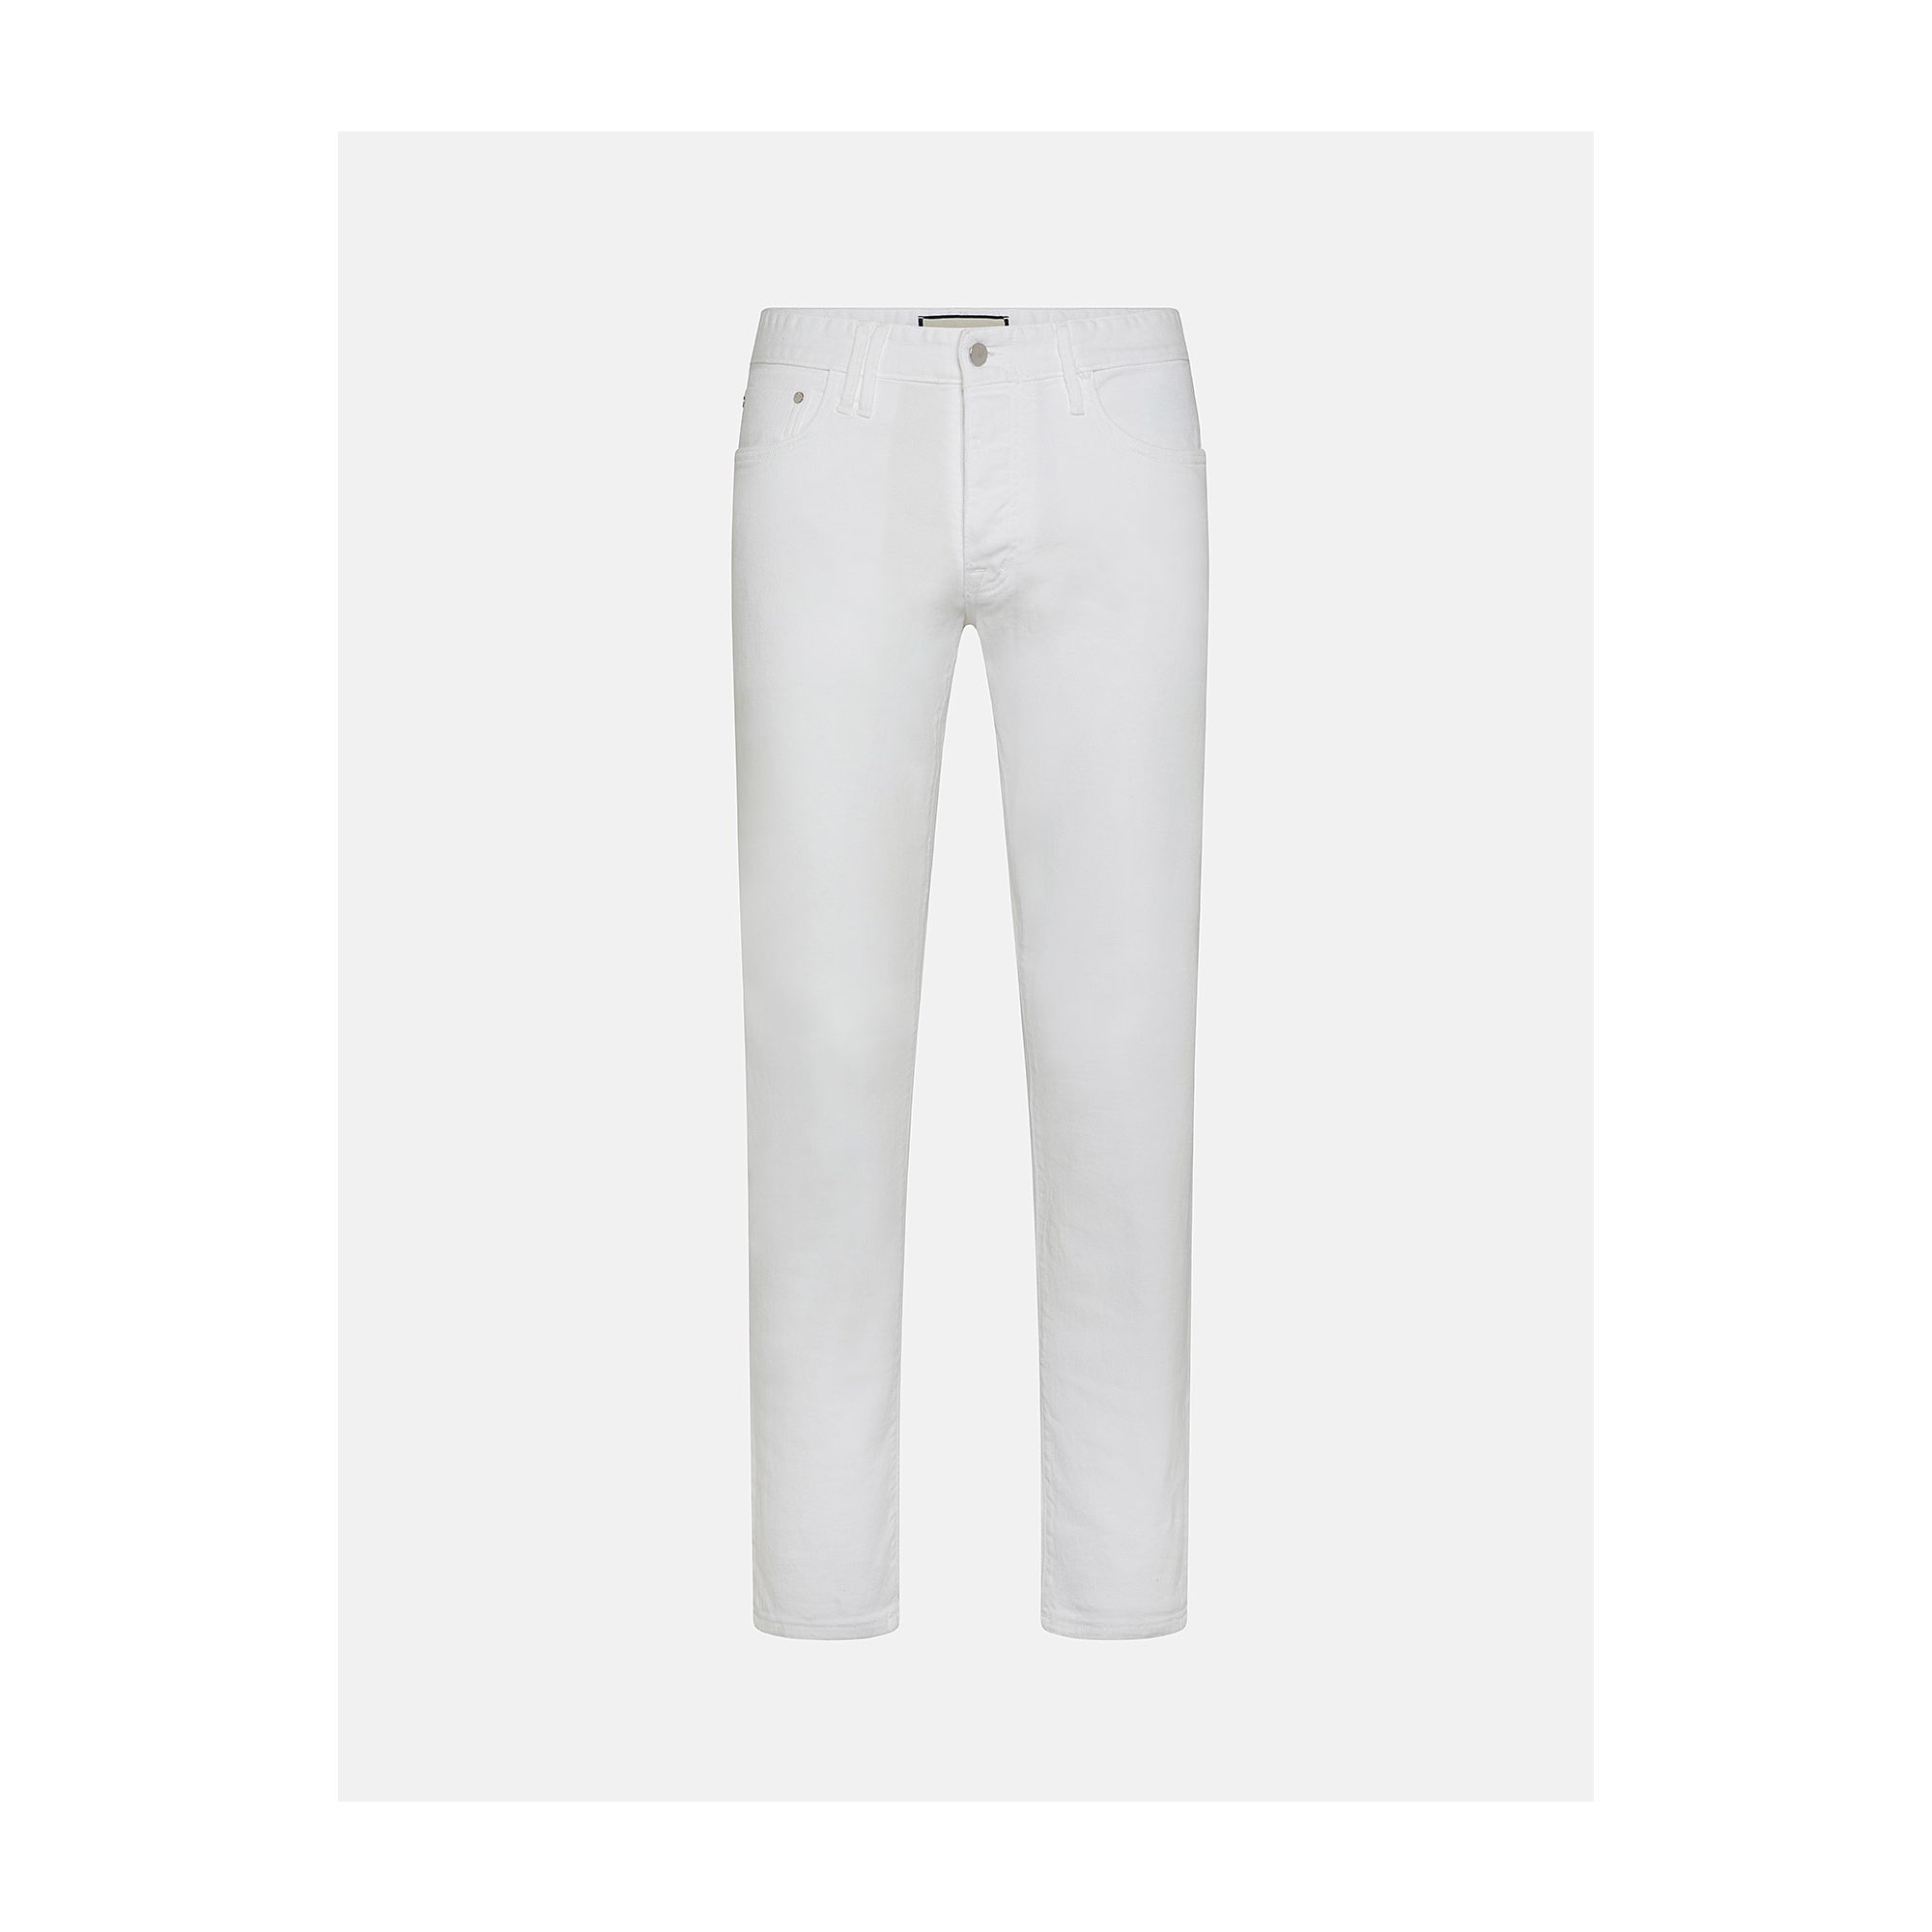 BEST COMFORT SLIM OLD DYED WHITE